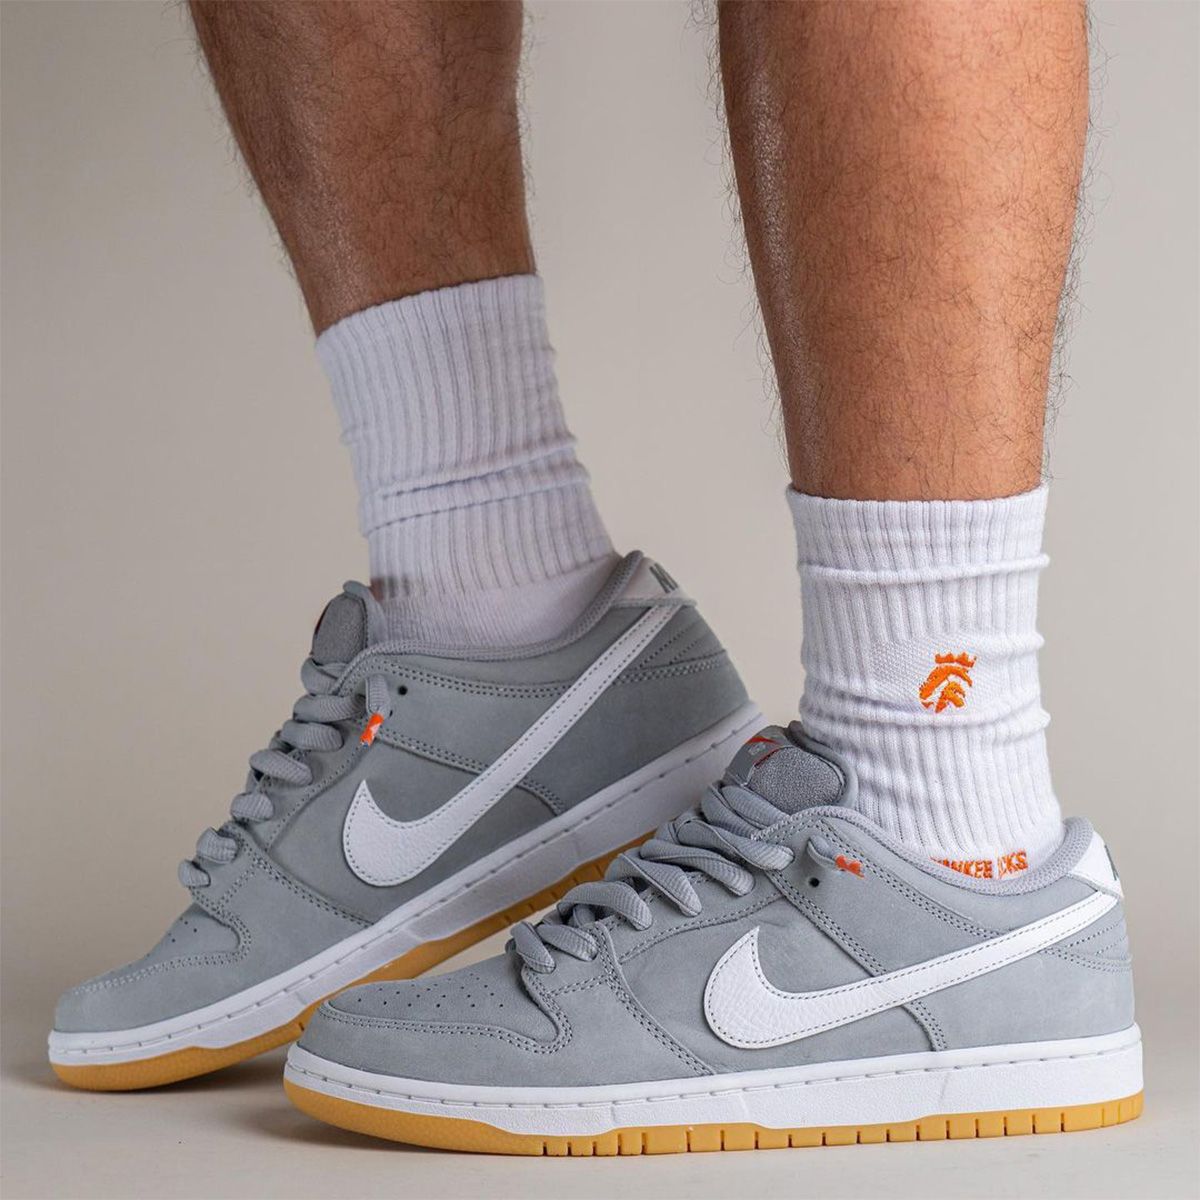 On-Foot Look: Unreleased Off-White x Nike Dunk Black/Grey Skated